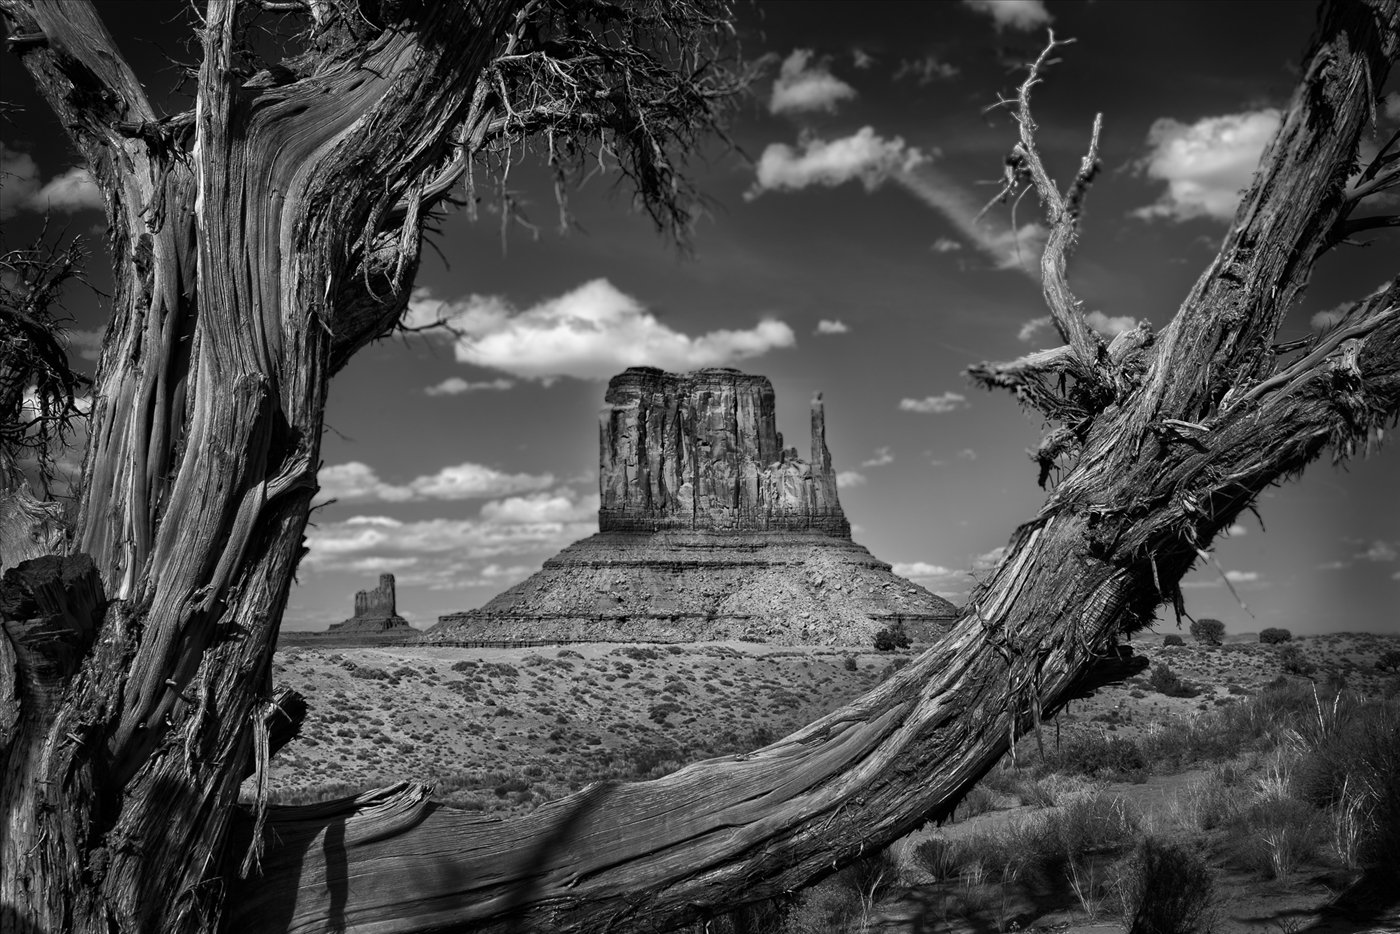 Monument Valley, Mike Pittman,	Louisiana Photographic Society,	2nd Place